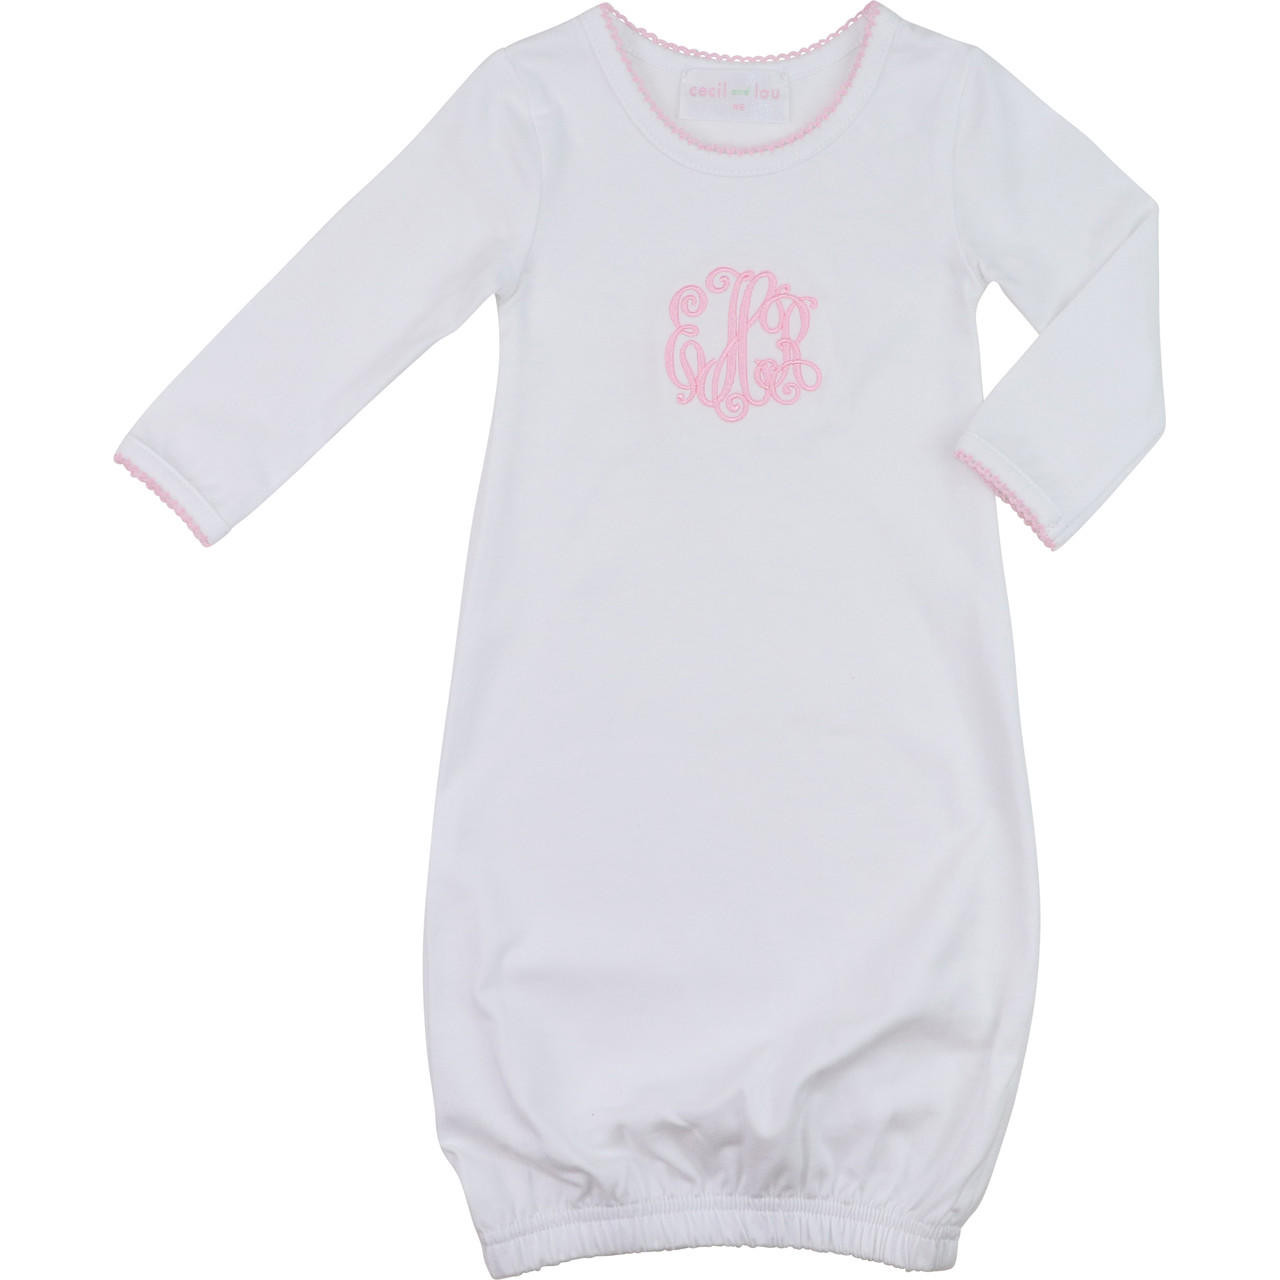 Baby Girl White and Pink Monogrammed Layette Gown and Headband Outfit Set